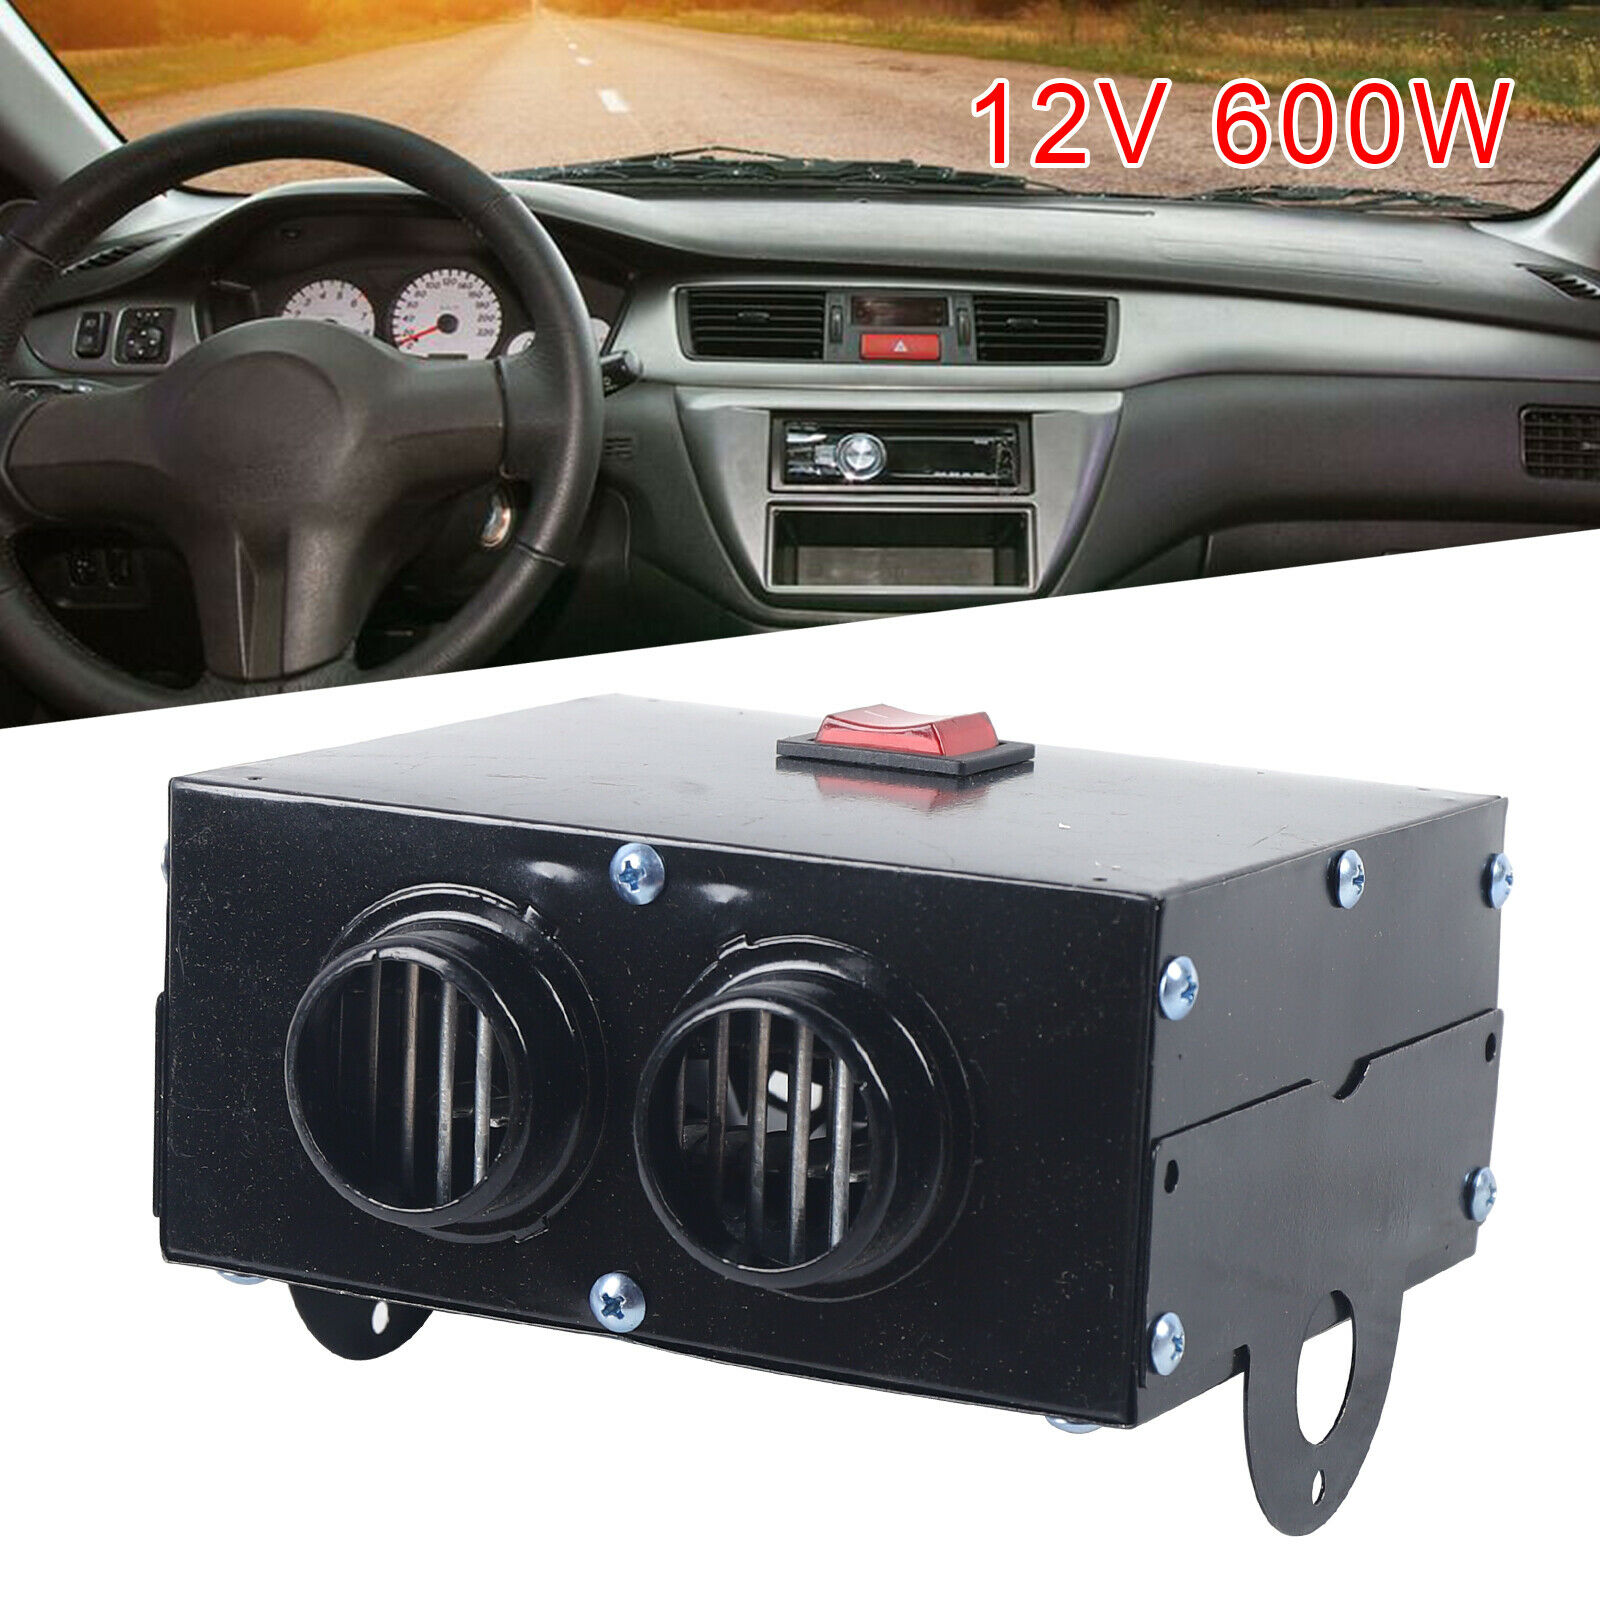 800w/600w Car Windshield Heating Cooling Fan Quick Heater Defroster Demister Usa